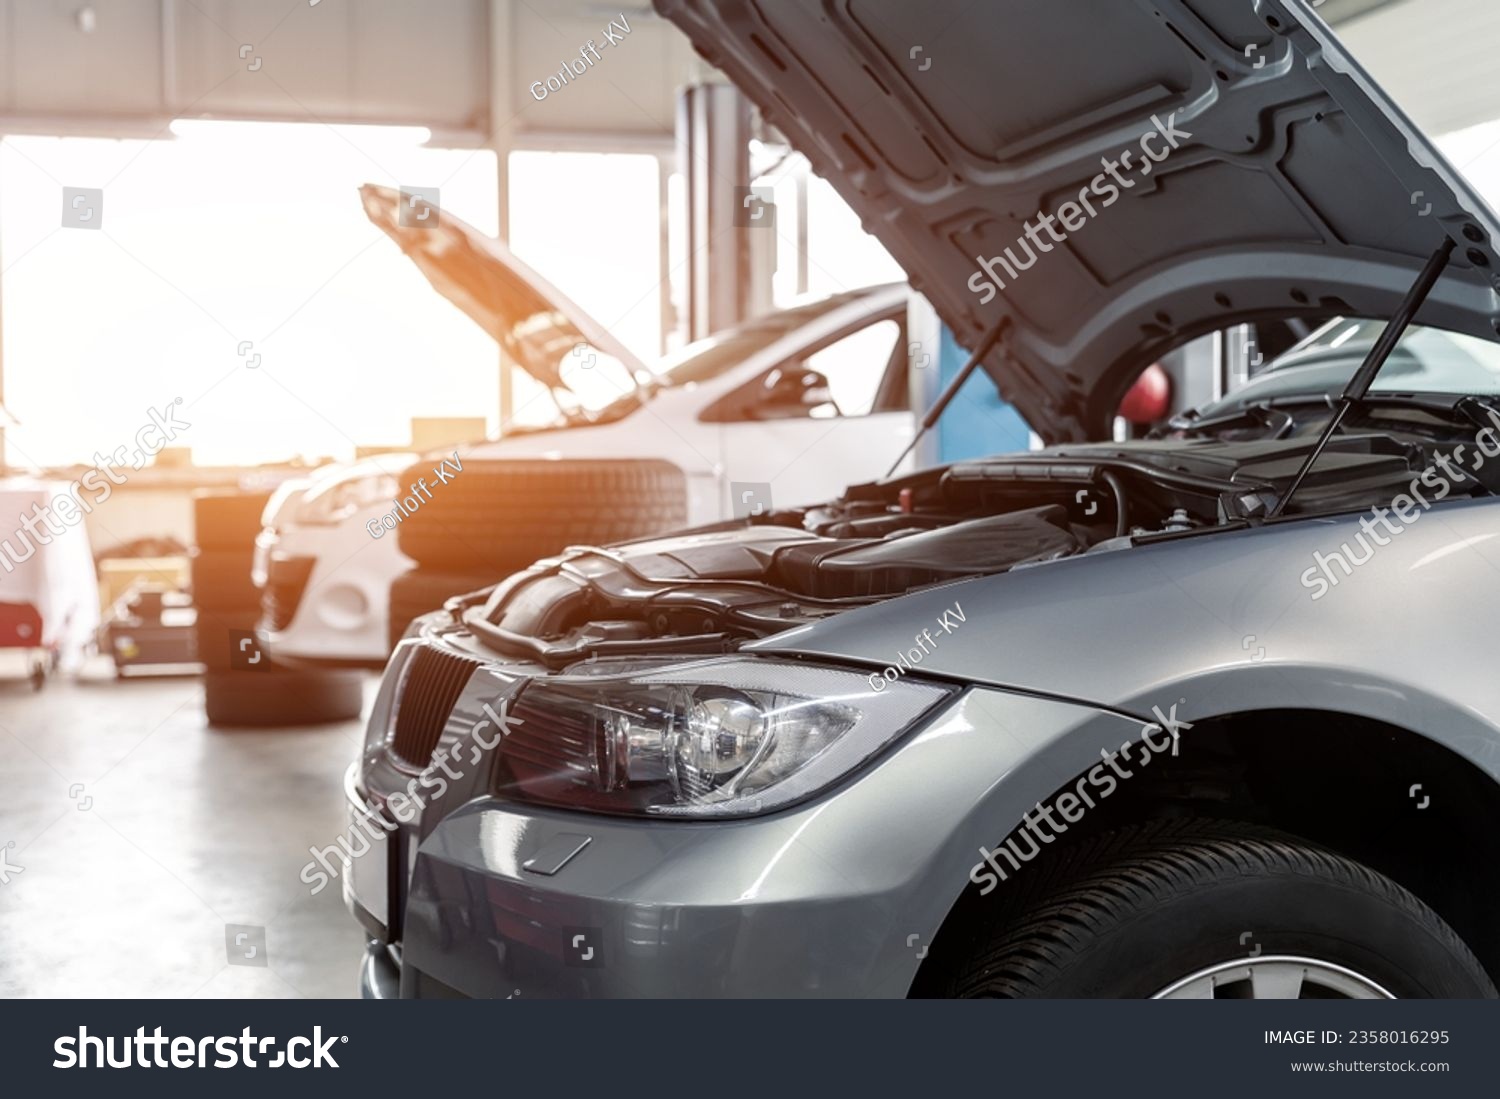 Car service center garage workshop. Vehicle raised on lift at maintenance station. Automobile repair and check up. Automotive insurance and technical checkup inspection diagnostic #2358016295